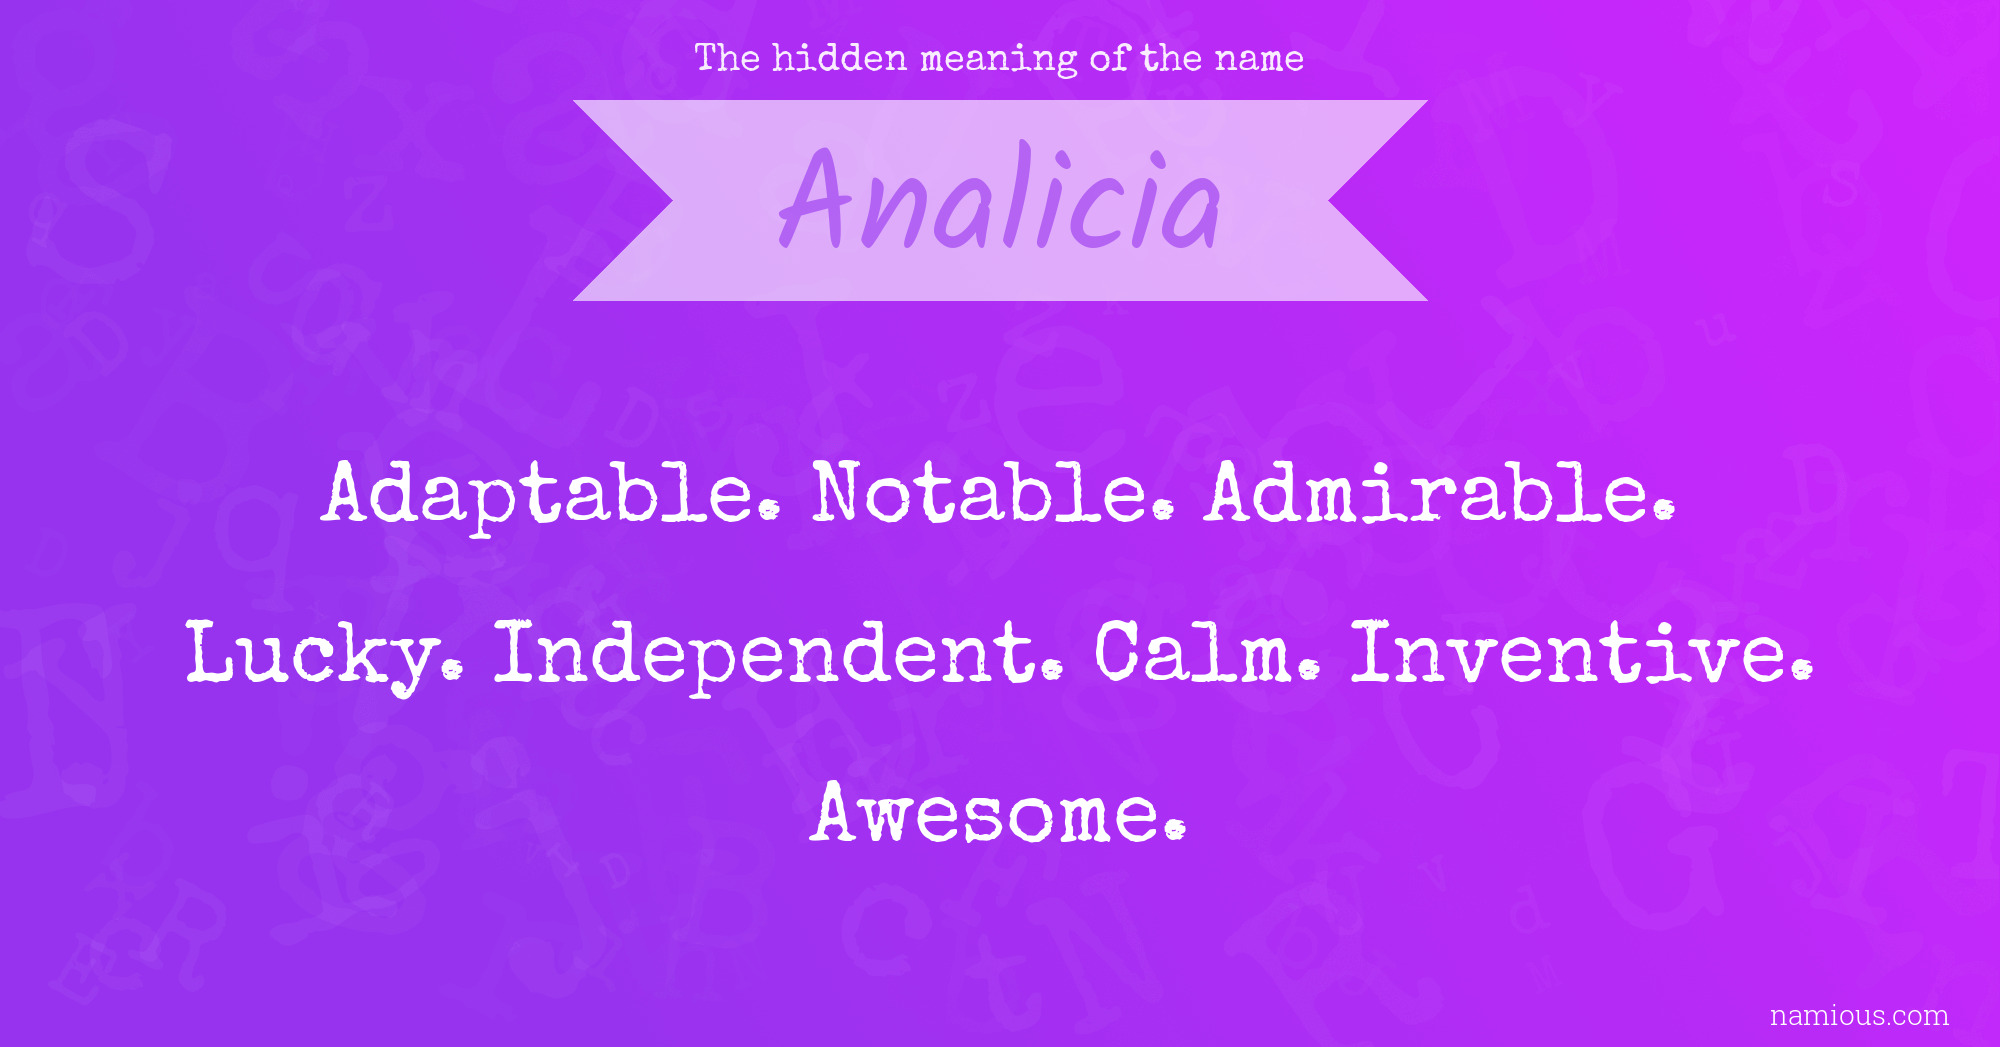 The hidden meaning of the name Analicia